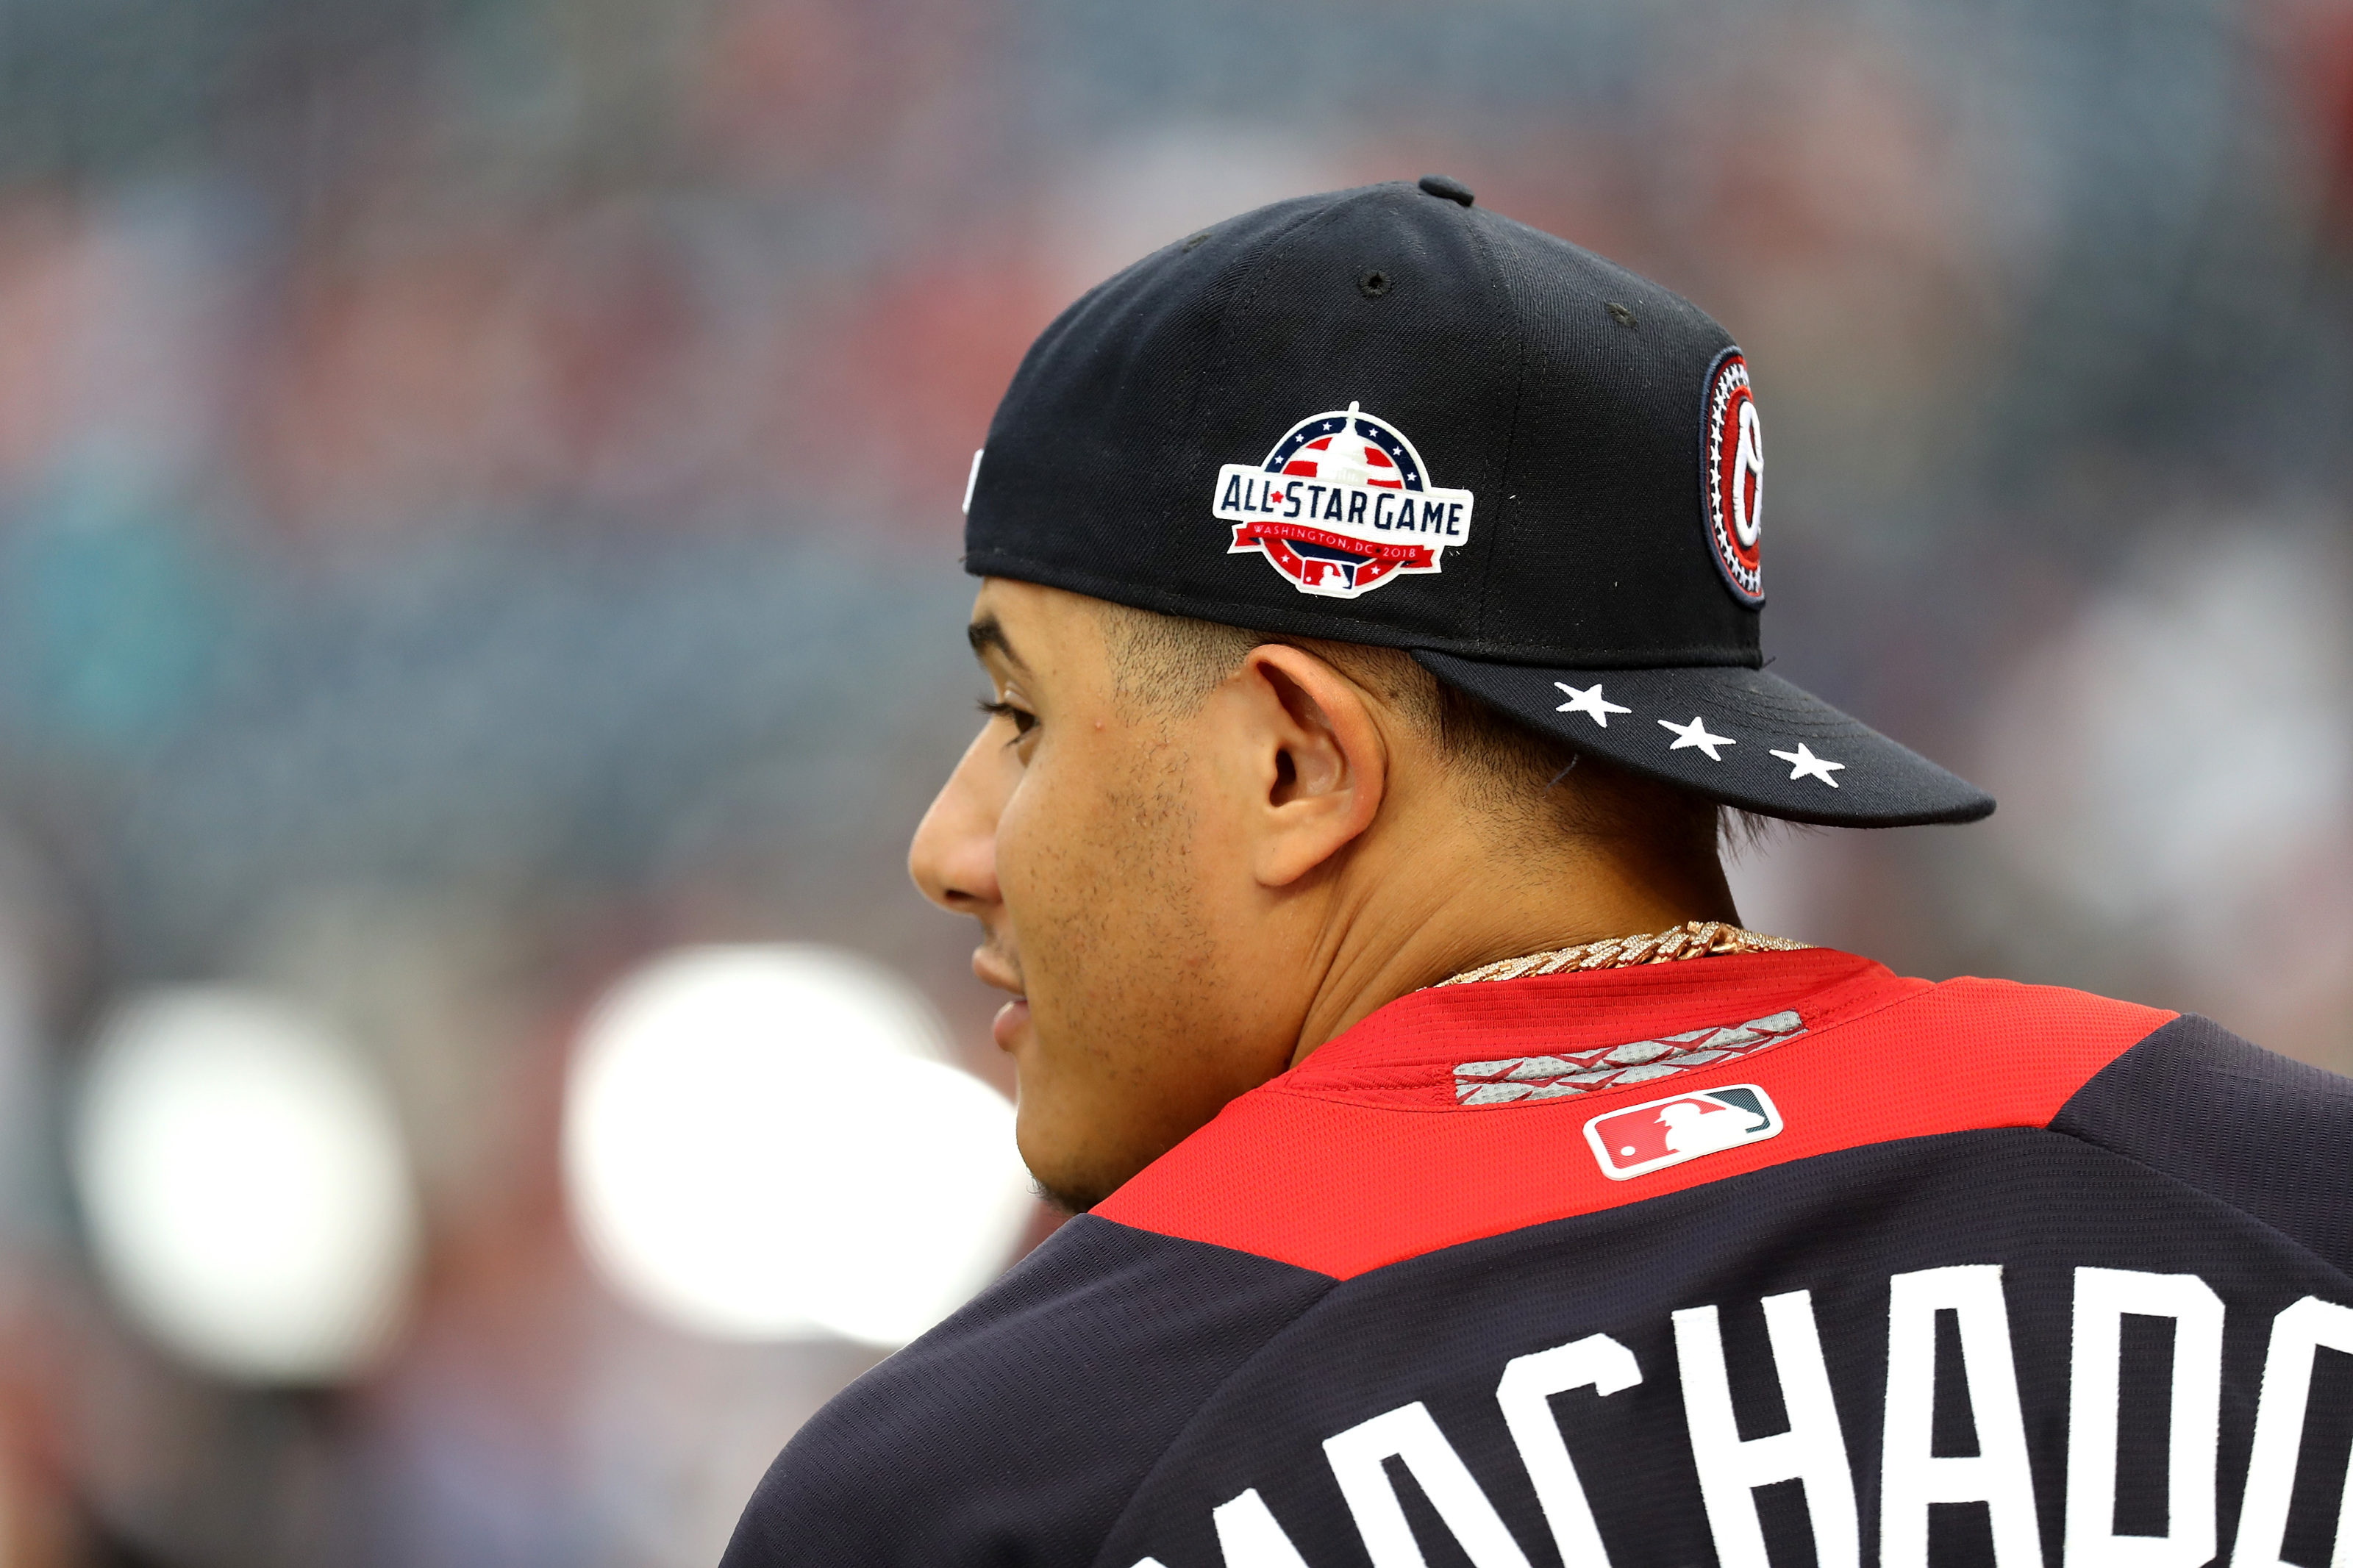 Baltimore Orioles Expected to Trade Manny Machado to Dodgers